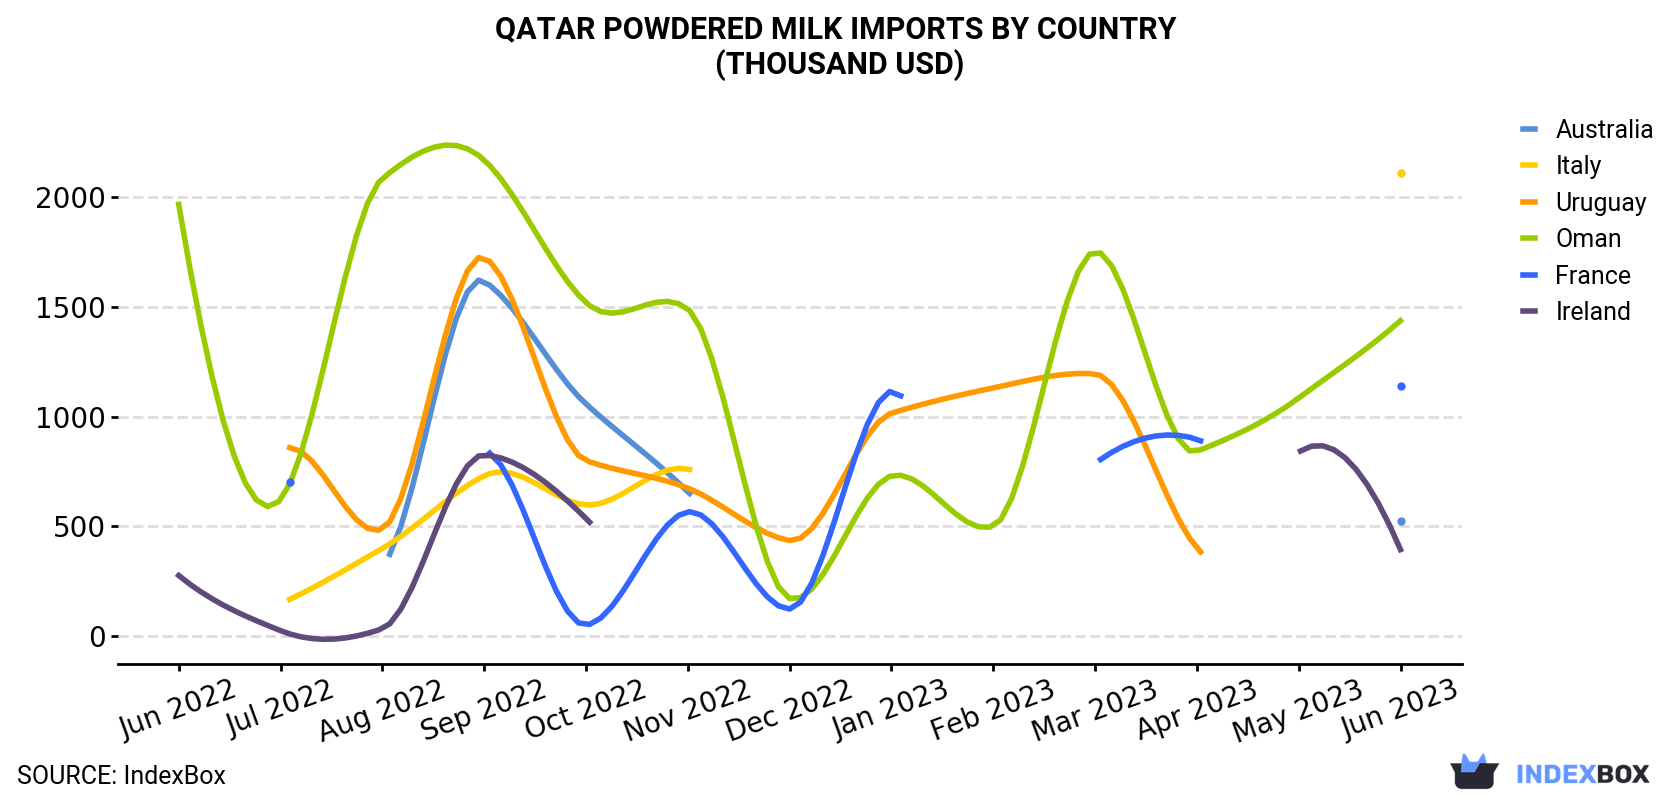 Qatar Powdered Milk Imports By Country (Thousand USD)